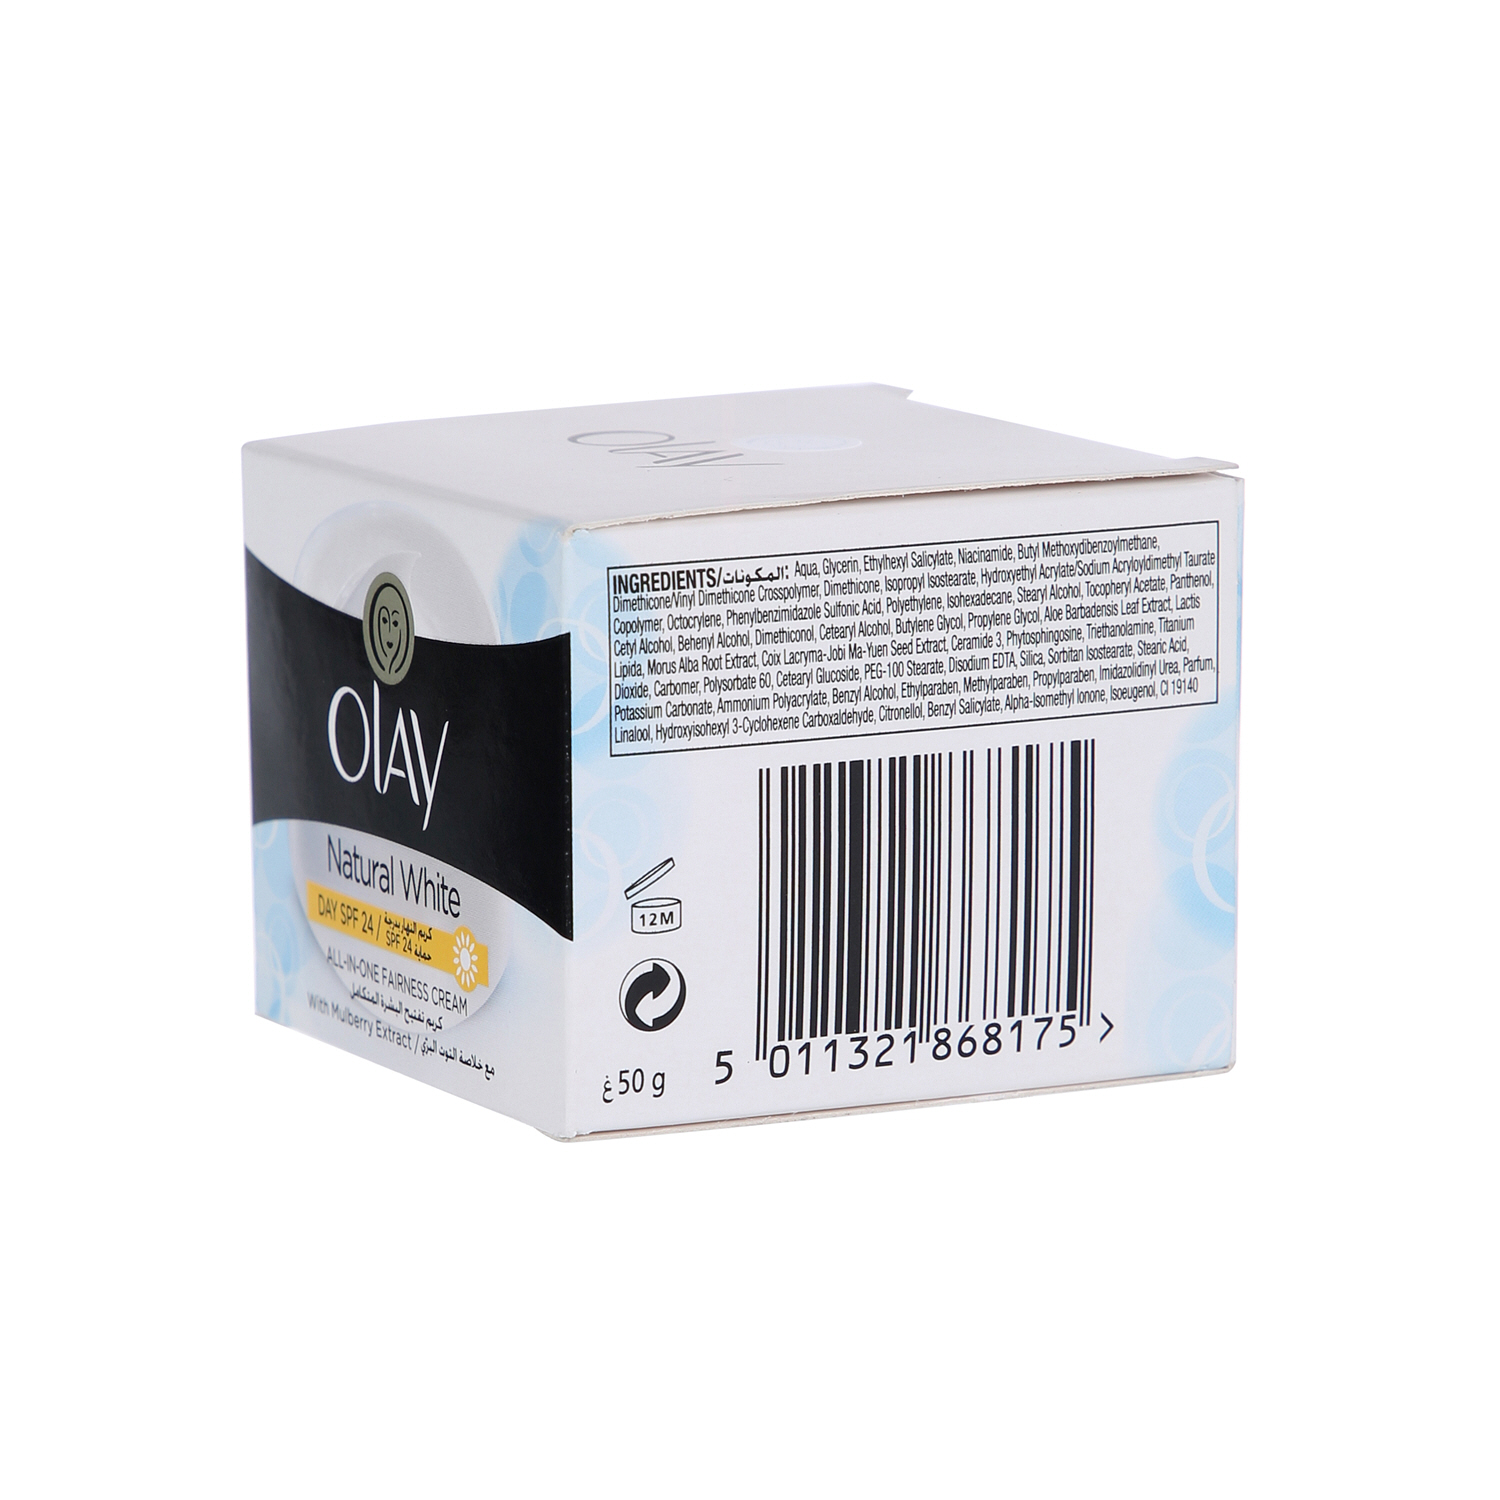 Olay Natural White All in One Fairness Cream with Mulberry Extract 50 g